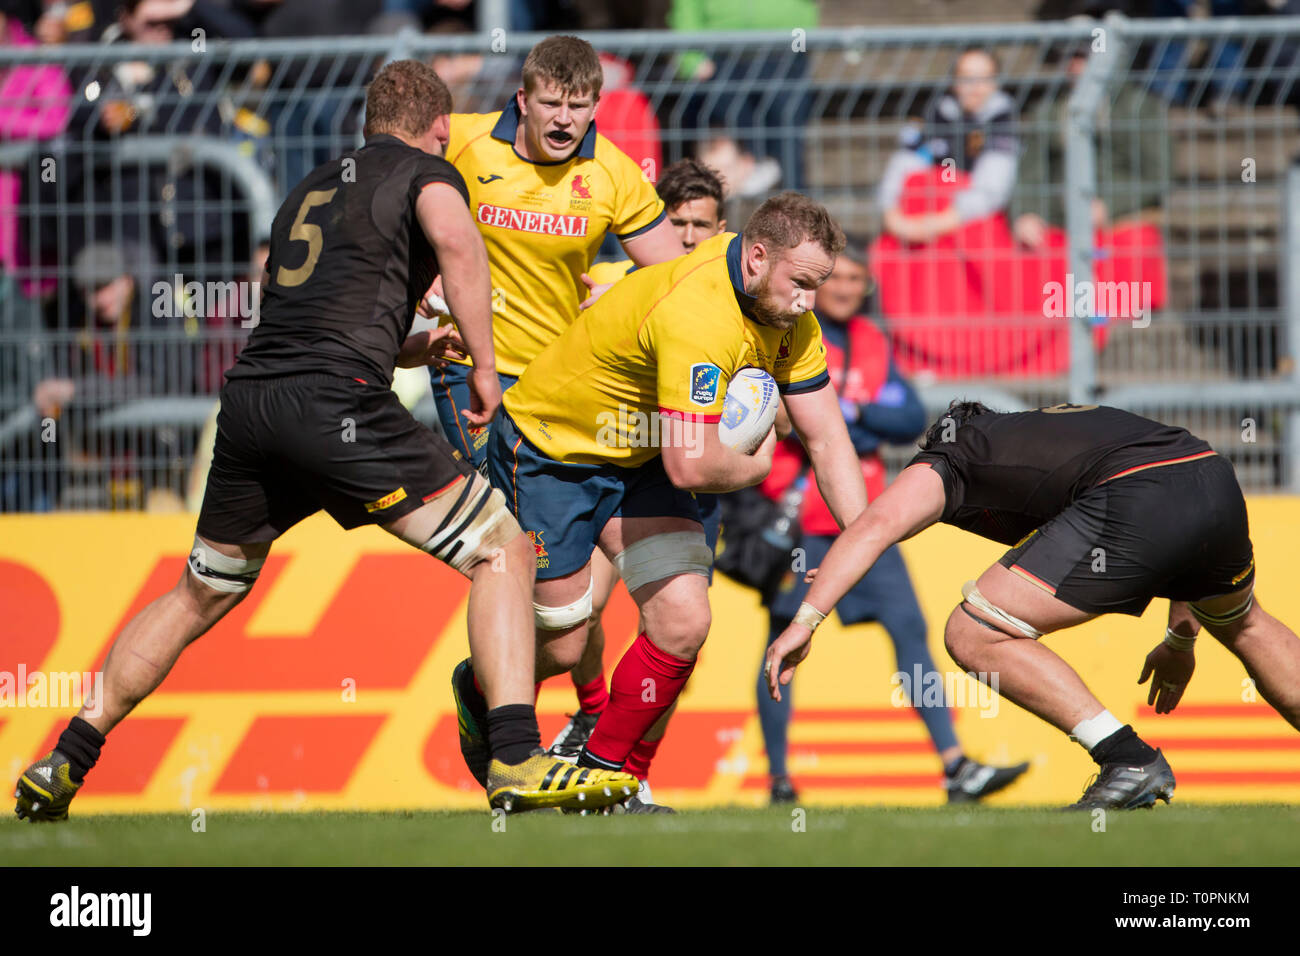 17 March 2019, North Rhine-Westphalia, Köln: Michael Walker-Fitton (Spain,  4) is expected by Marcel Henn (Germany, 16), Eric Marks (Germany, 5) on the  left. Fifth match of the Rugby Europe Championship 2019: